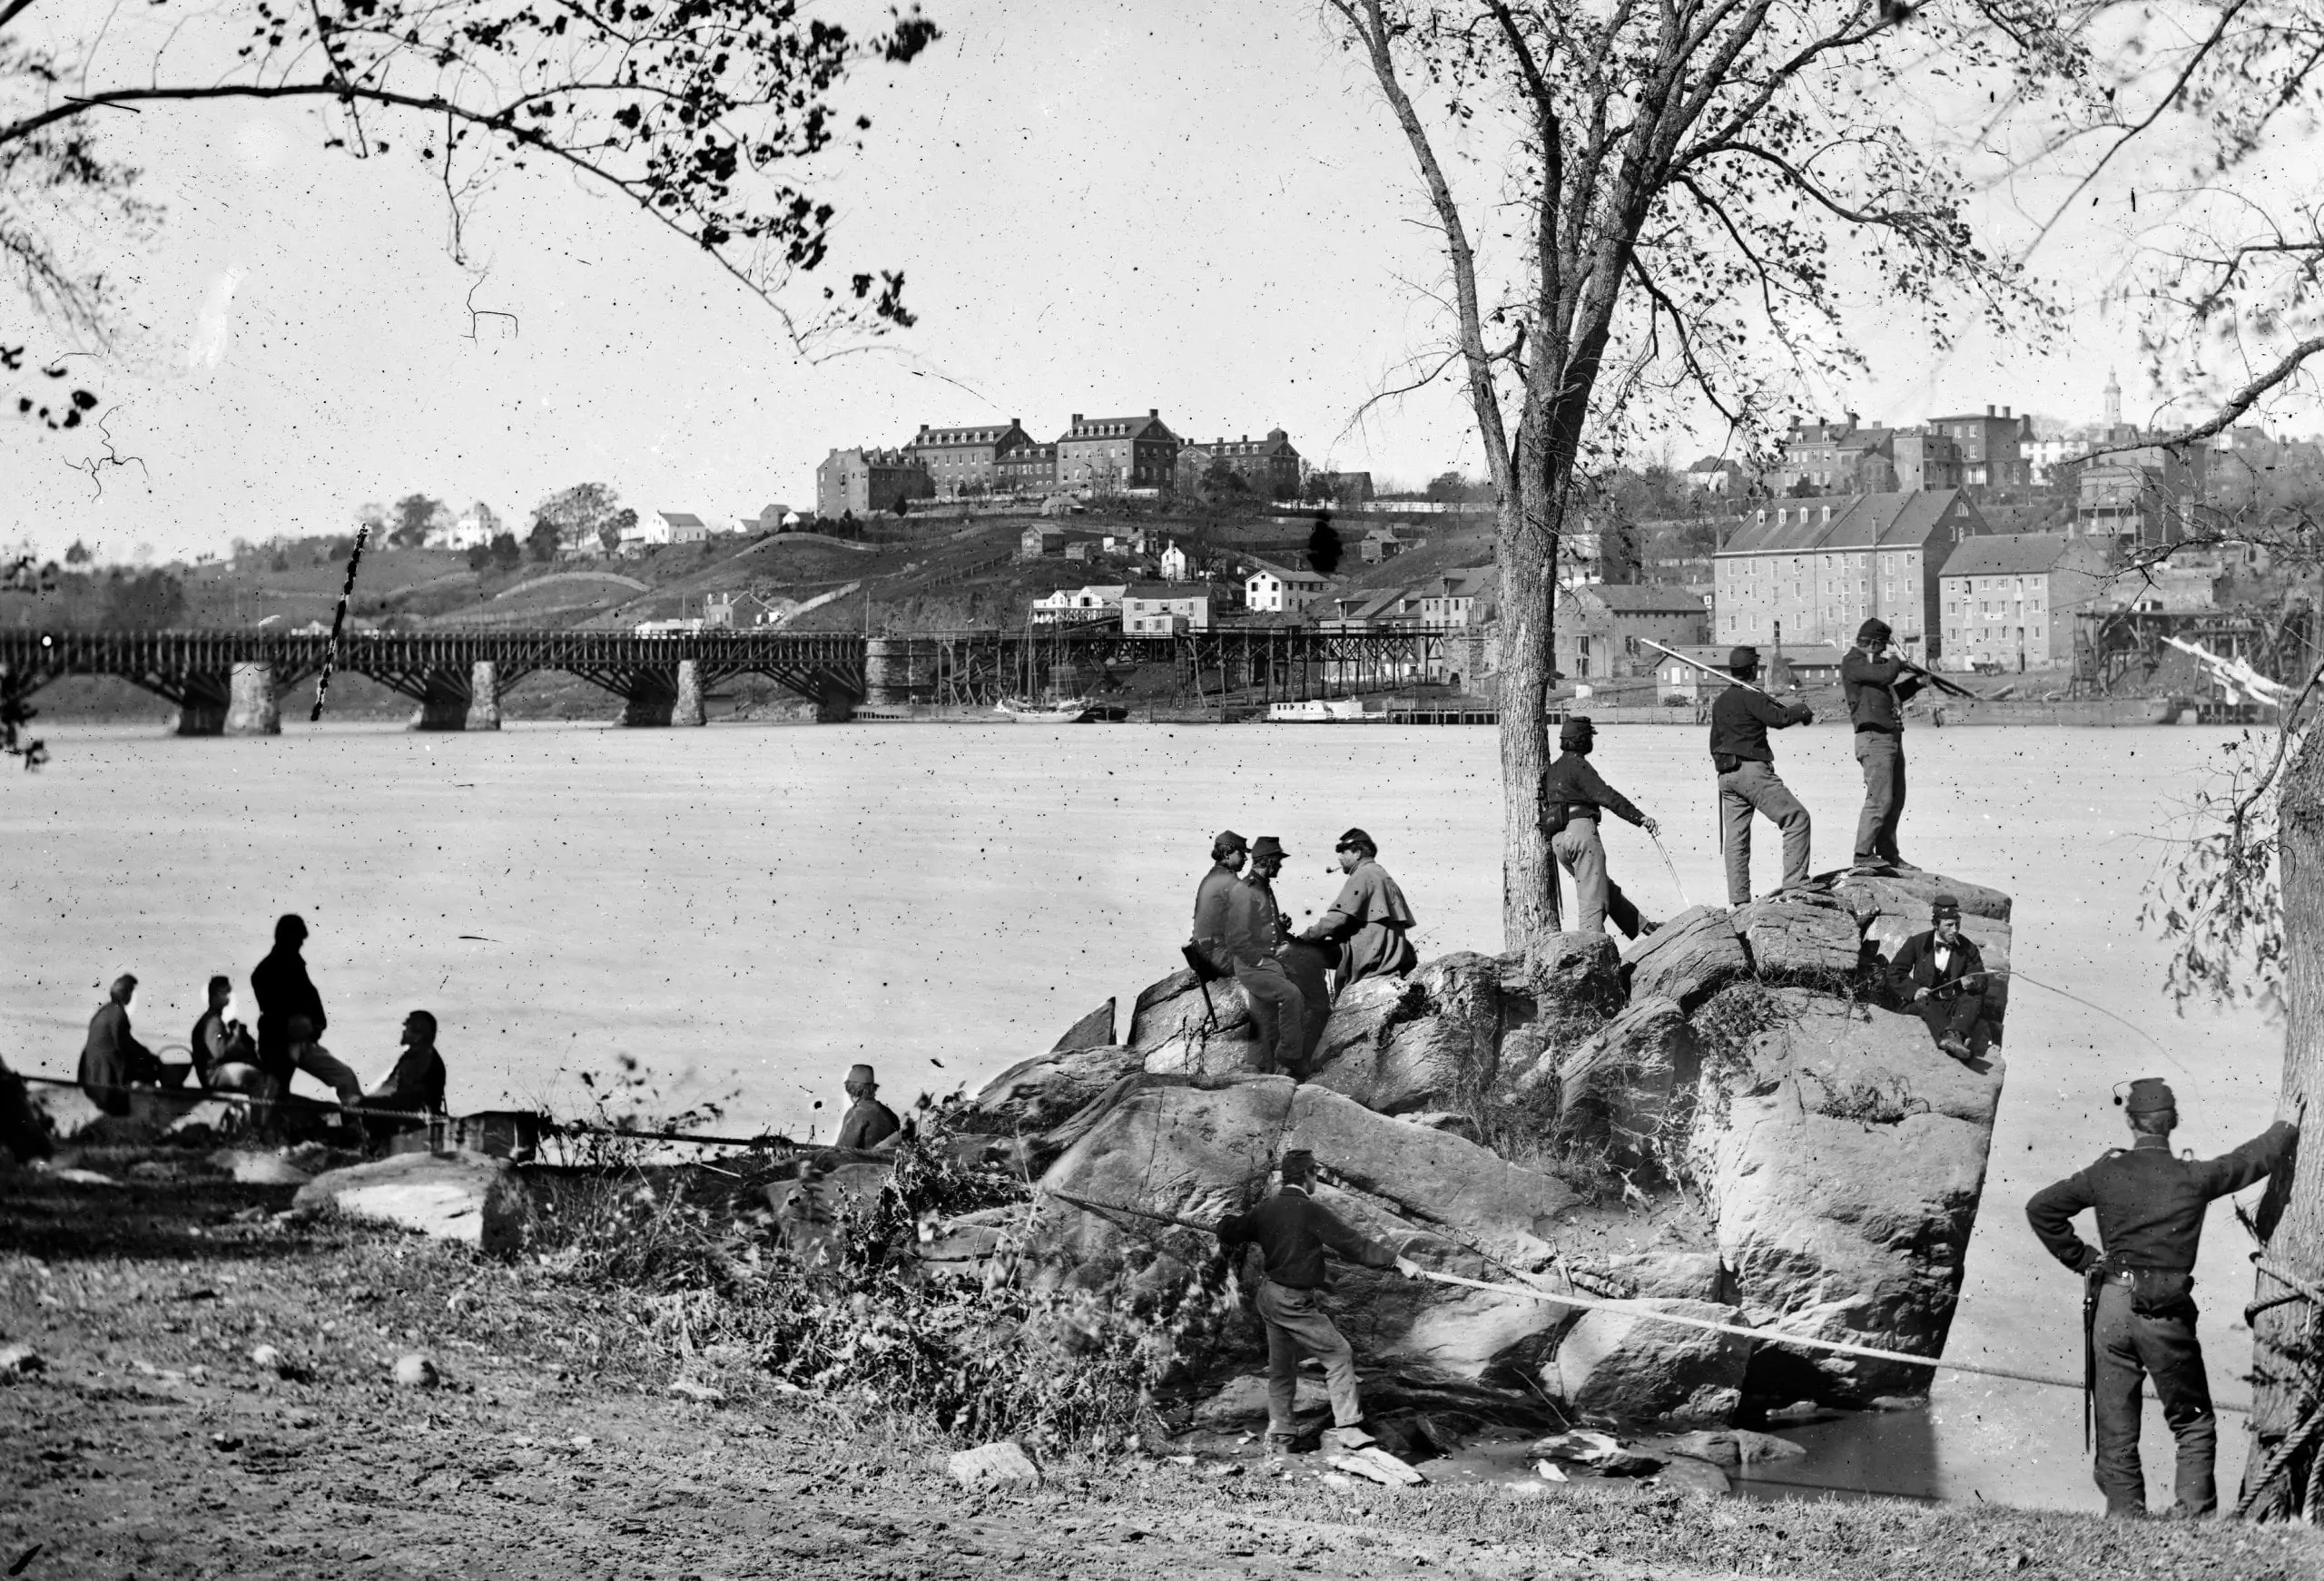 Union soldiers guarding the Potomac River in Washington, DC in 1861. Georgetown University is visible in the background. Photo by George Barnard